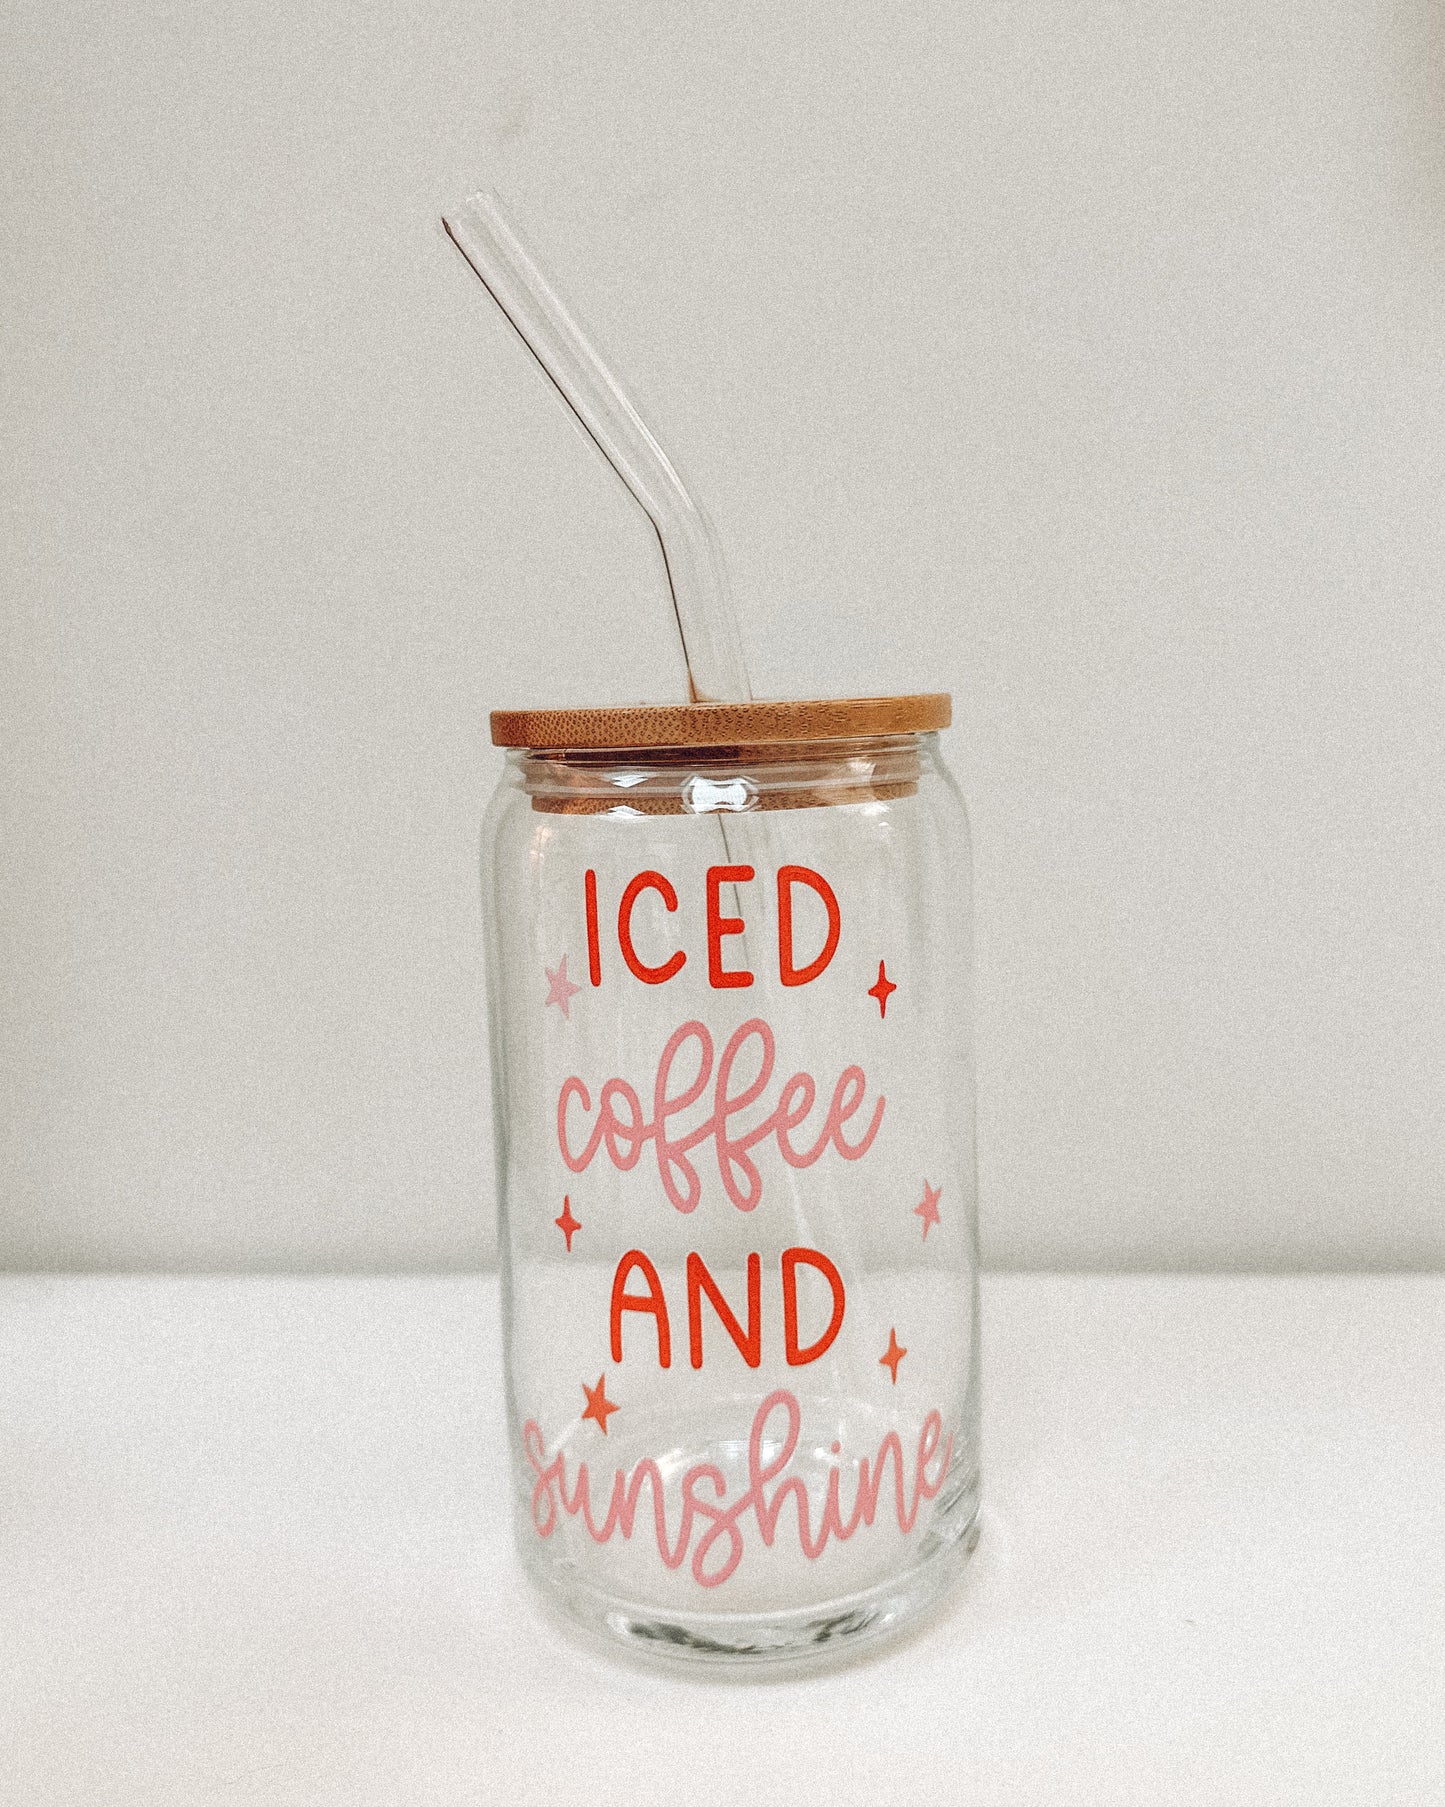 Aesthetic Iced Coffee Cup, Beer Soda Can Pint Glass